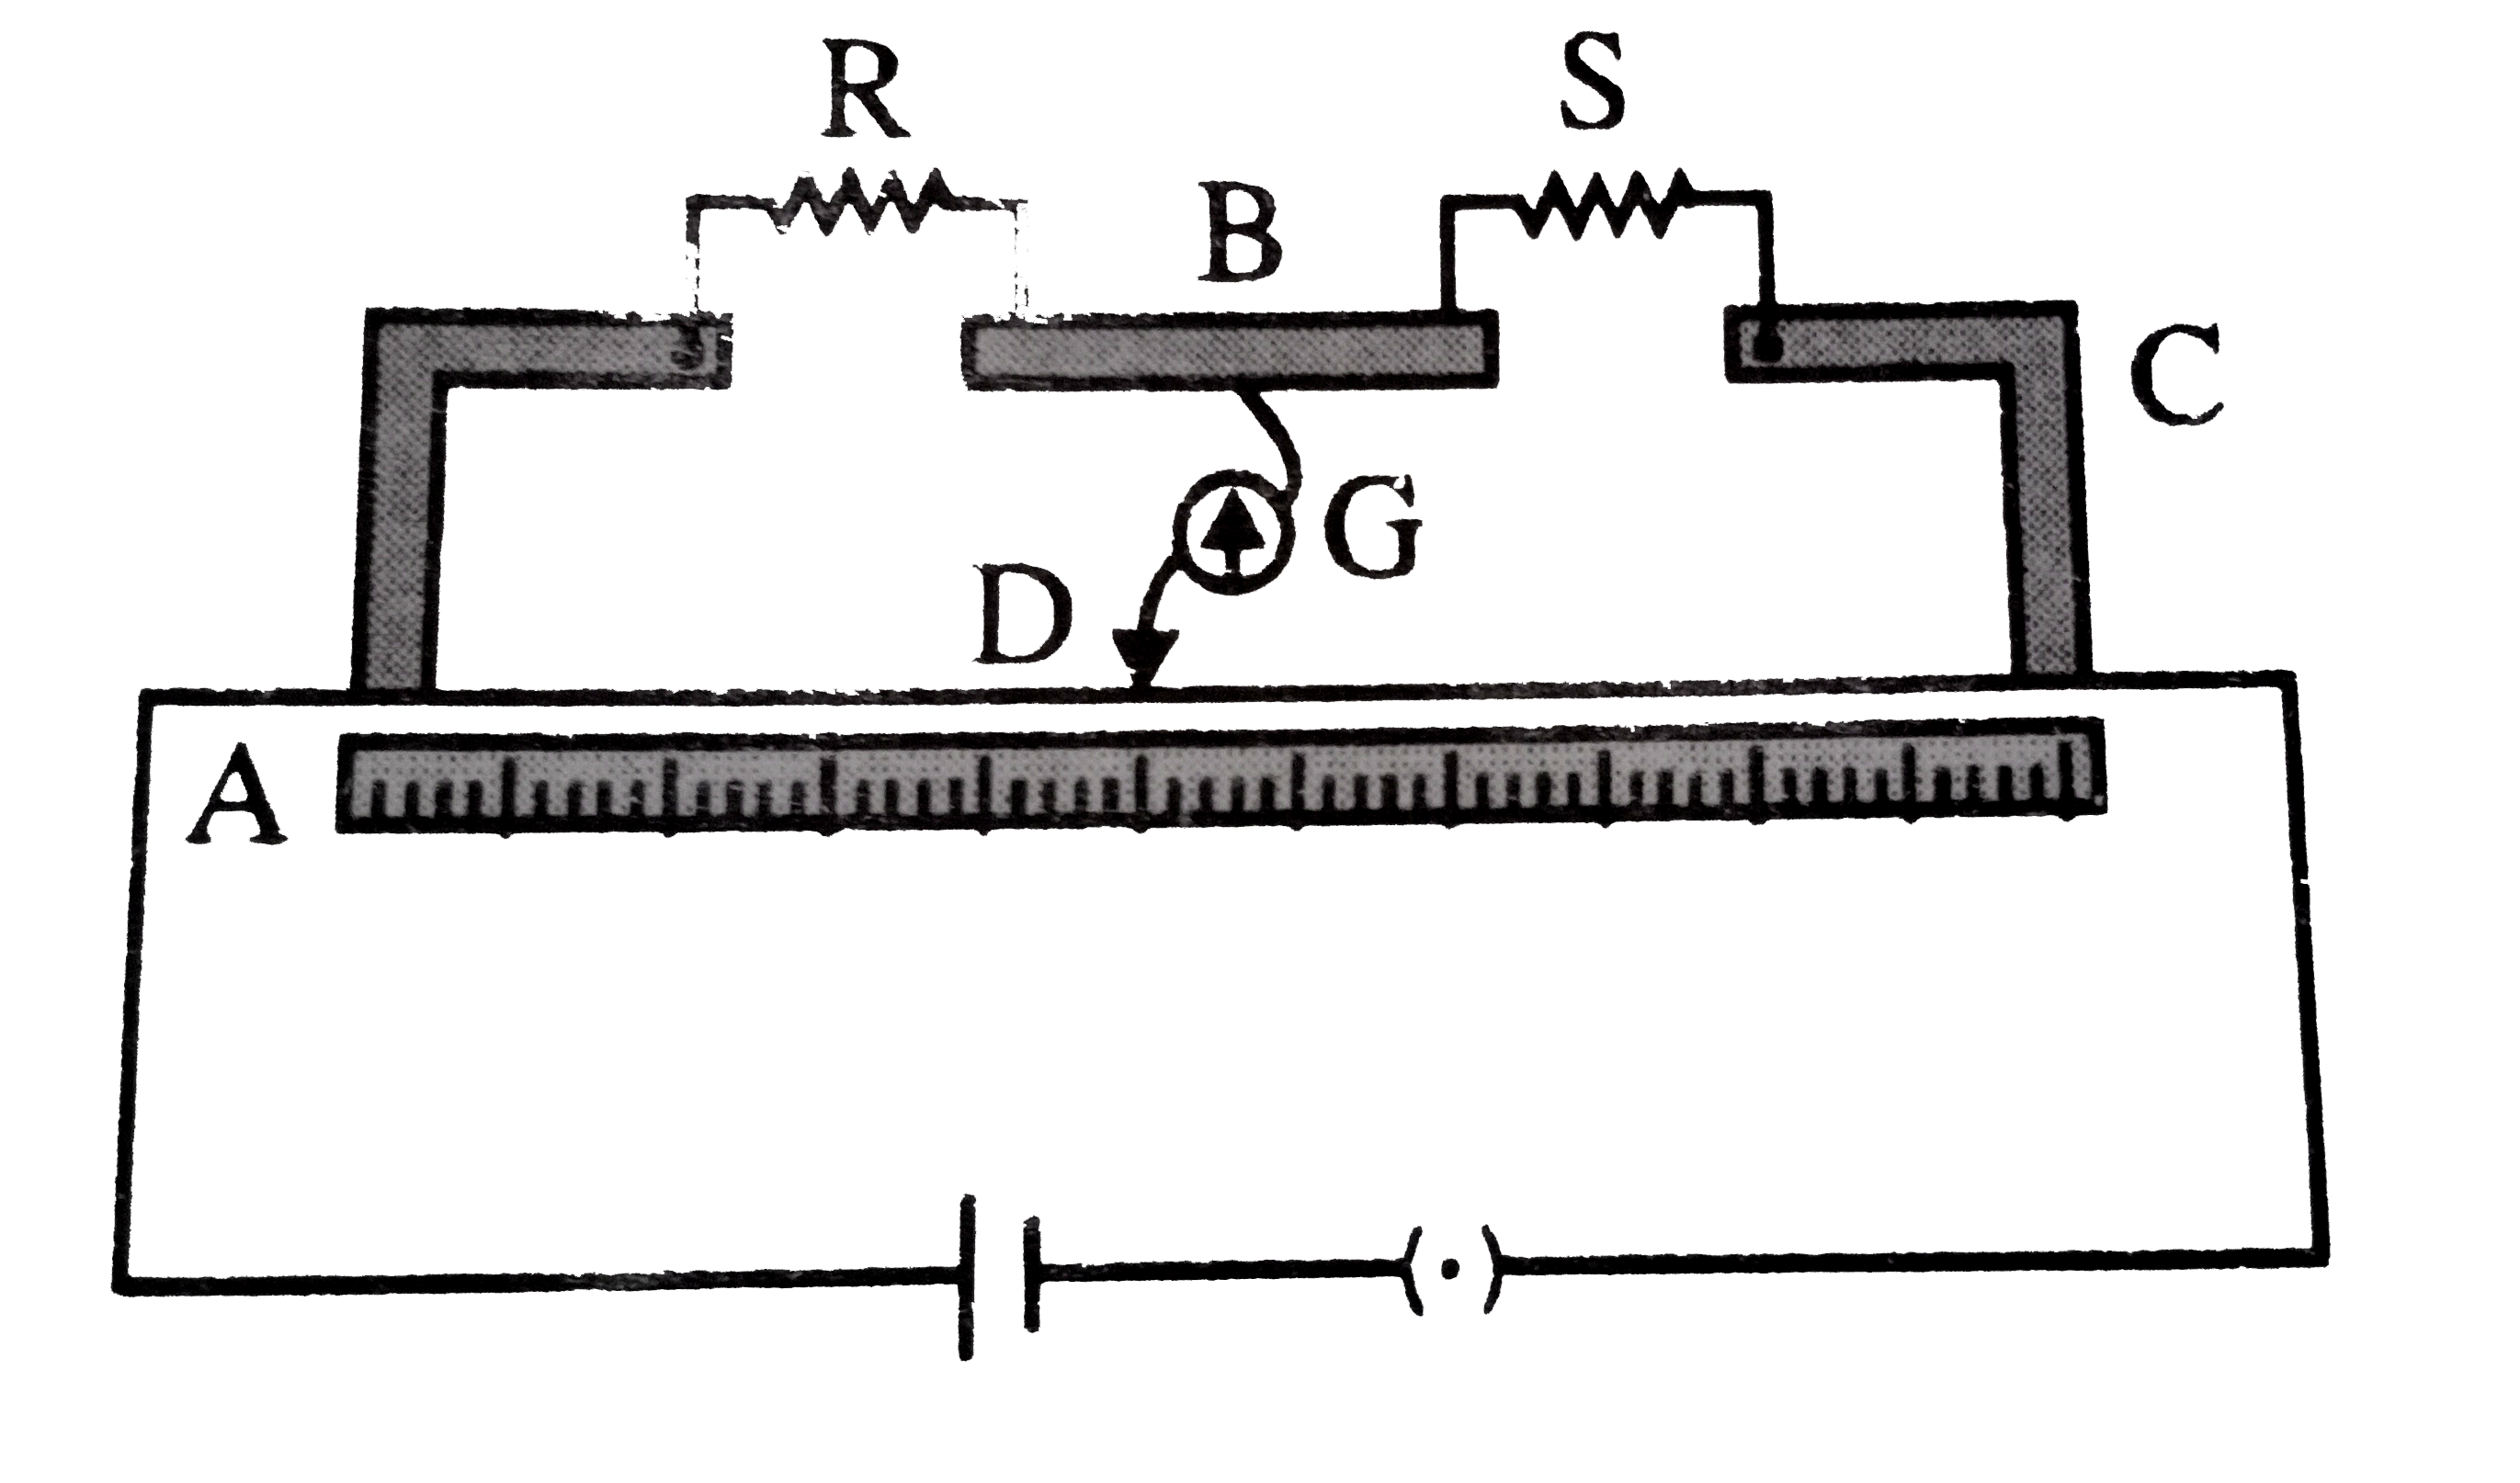 Circuit diagram of metre bridge is shown in figure. The null point is found at a distance of 40cm from A. it now a resistance of 12Omega is connected in parallel with S, the null point occurs at 64cm.